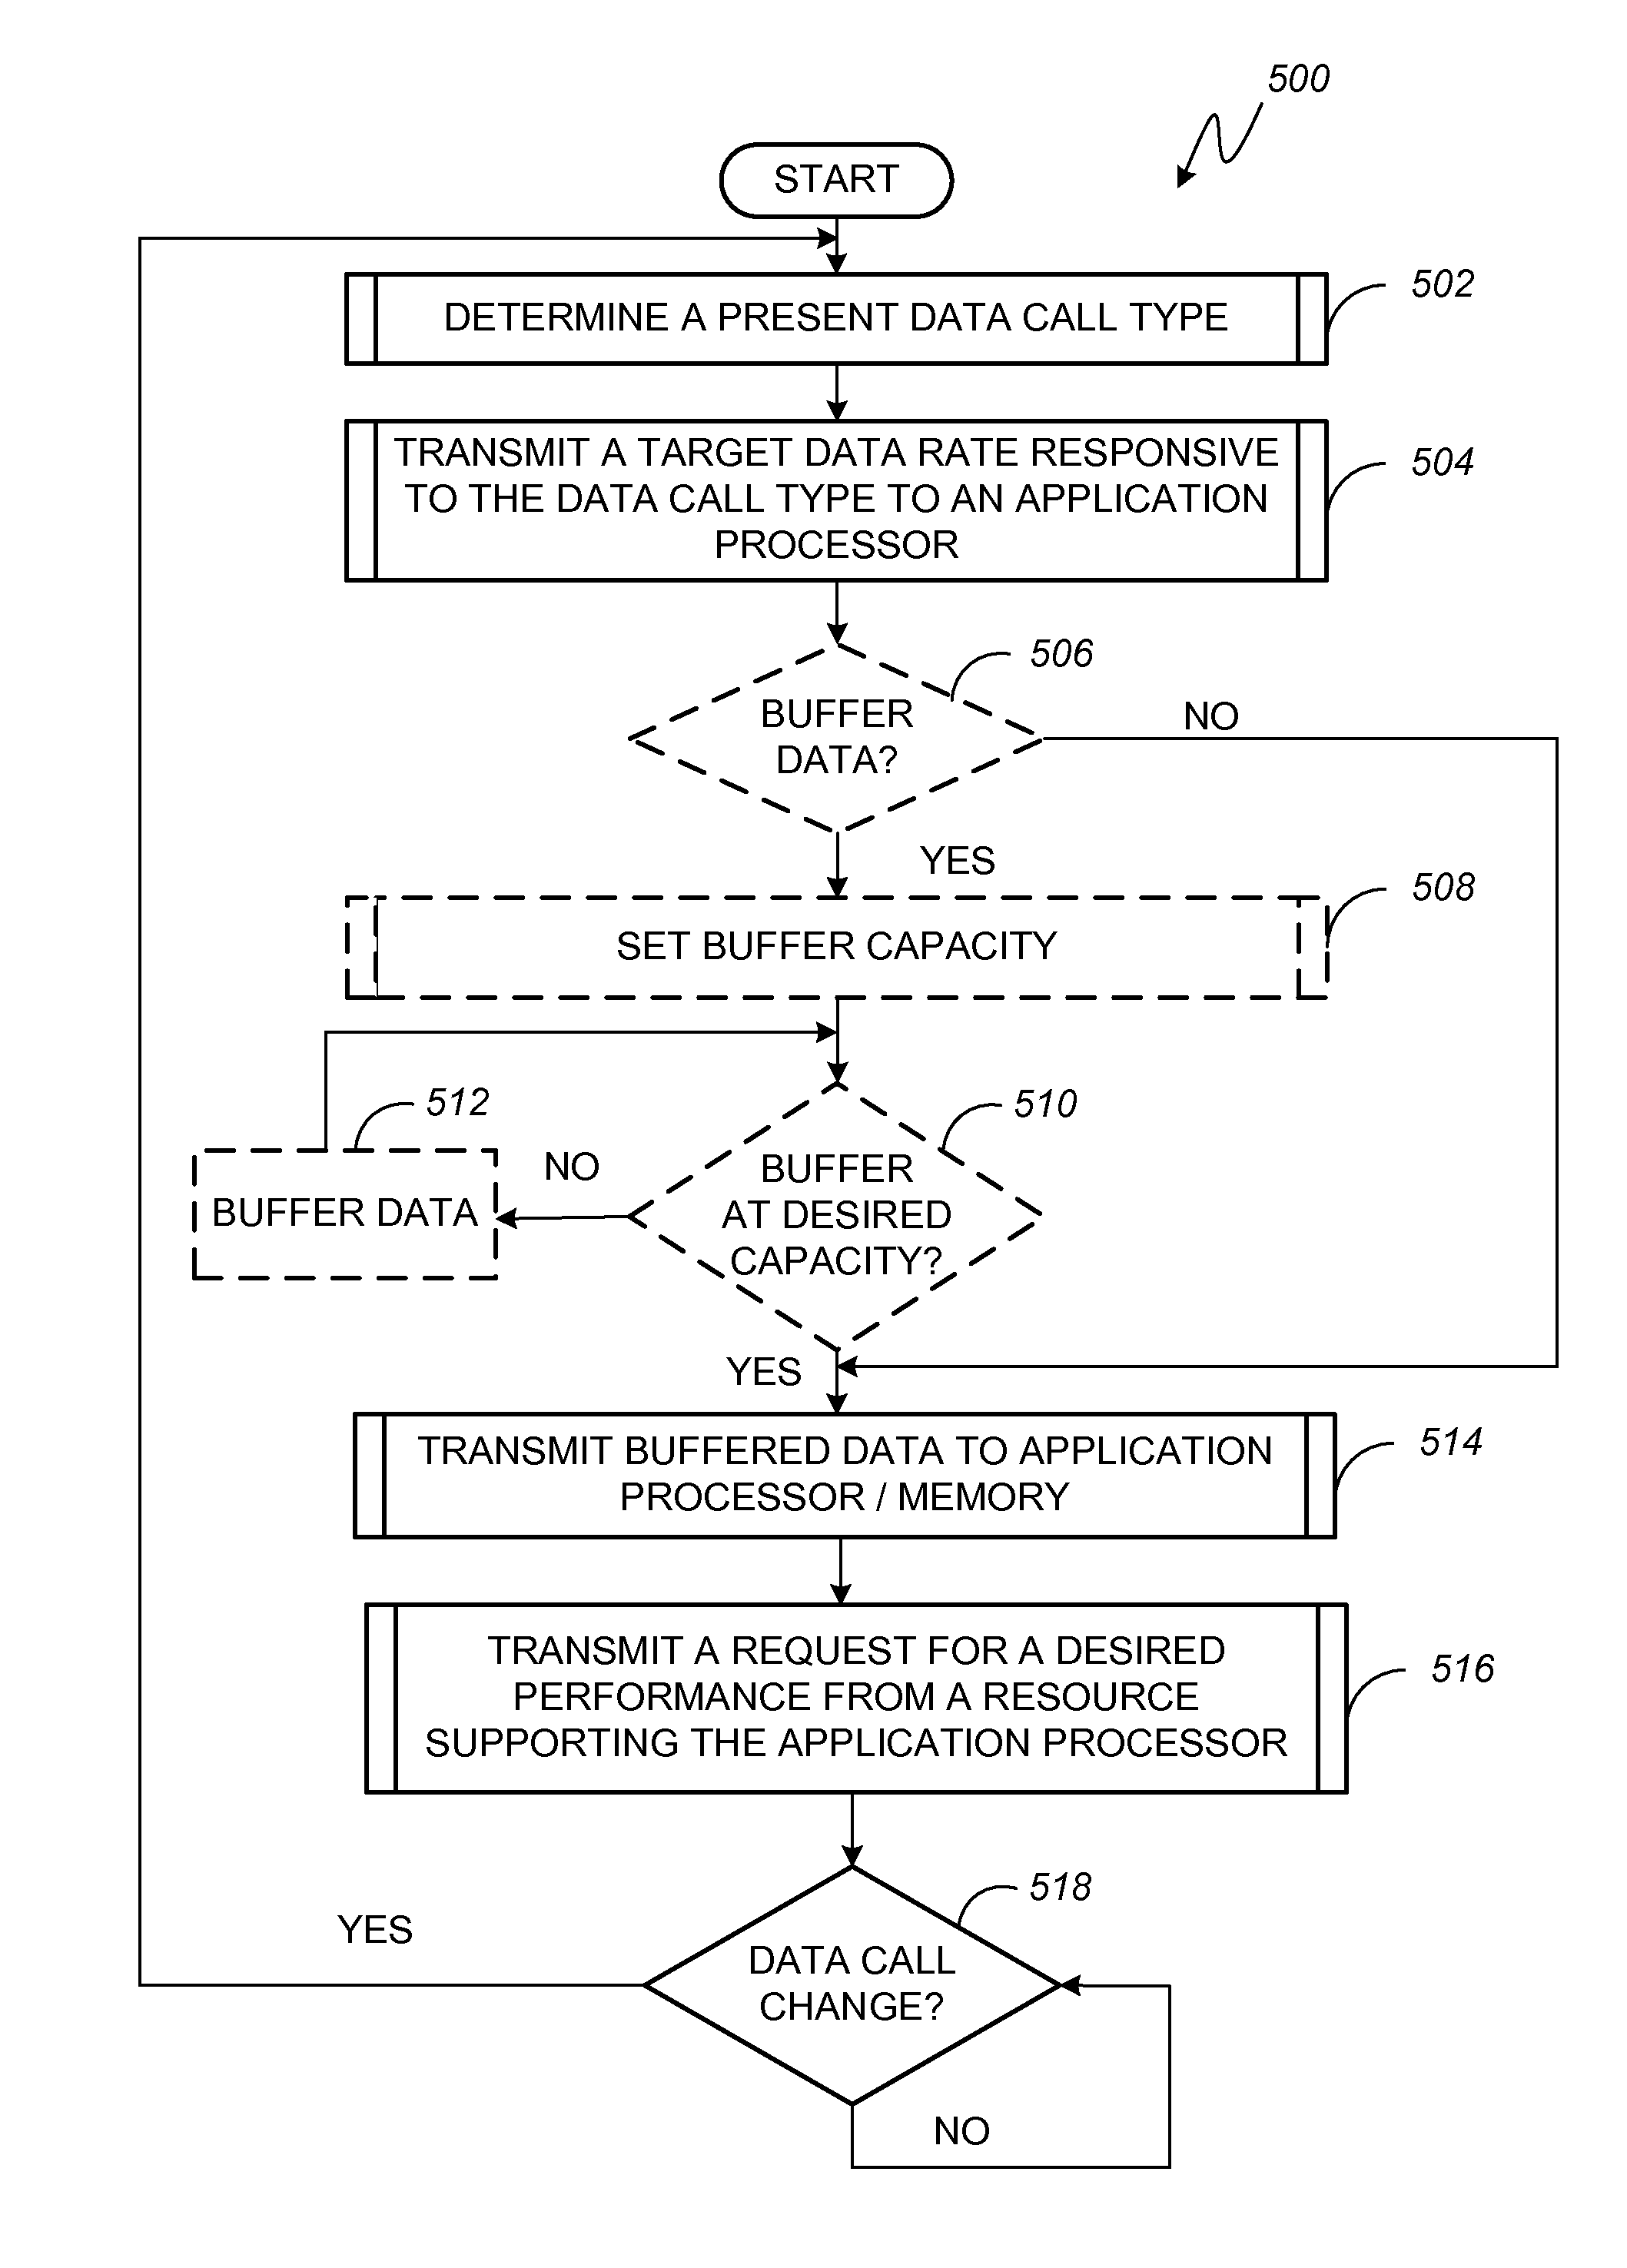 Dynamic adjustment of an interrupt latency threshold and a resource supporting a processor in a portable computing device